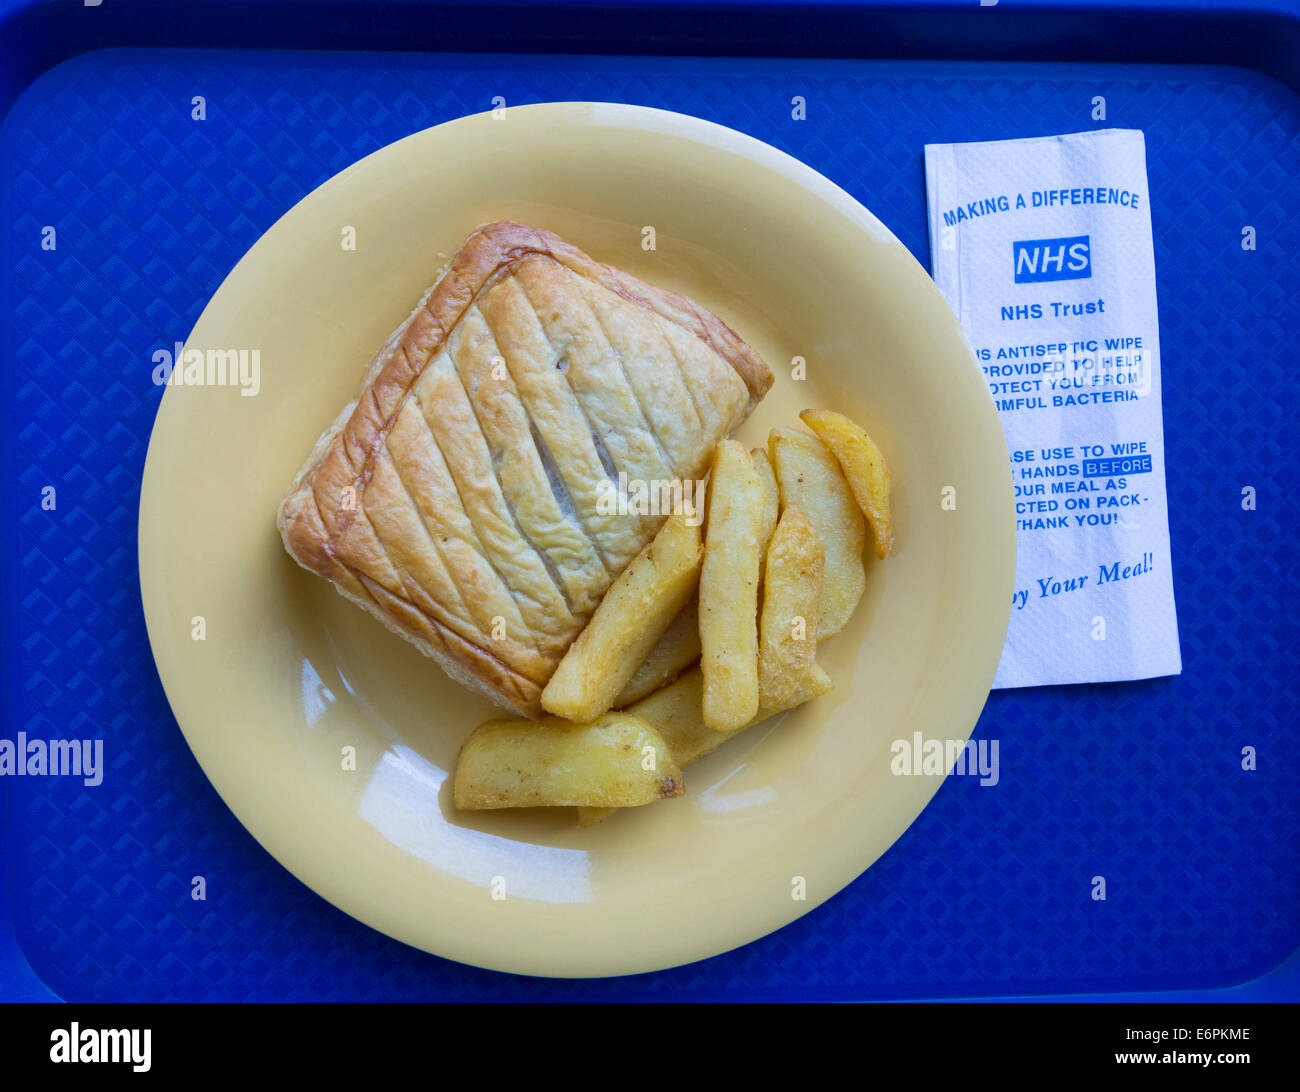 Hospital food. Meal on tray in NHS hospital in England, UK Stock Photo